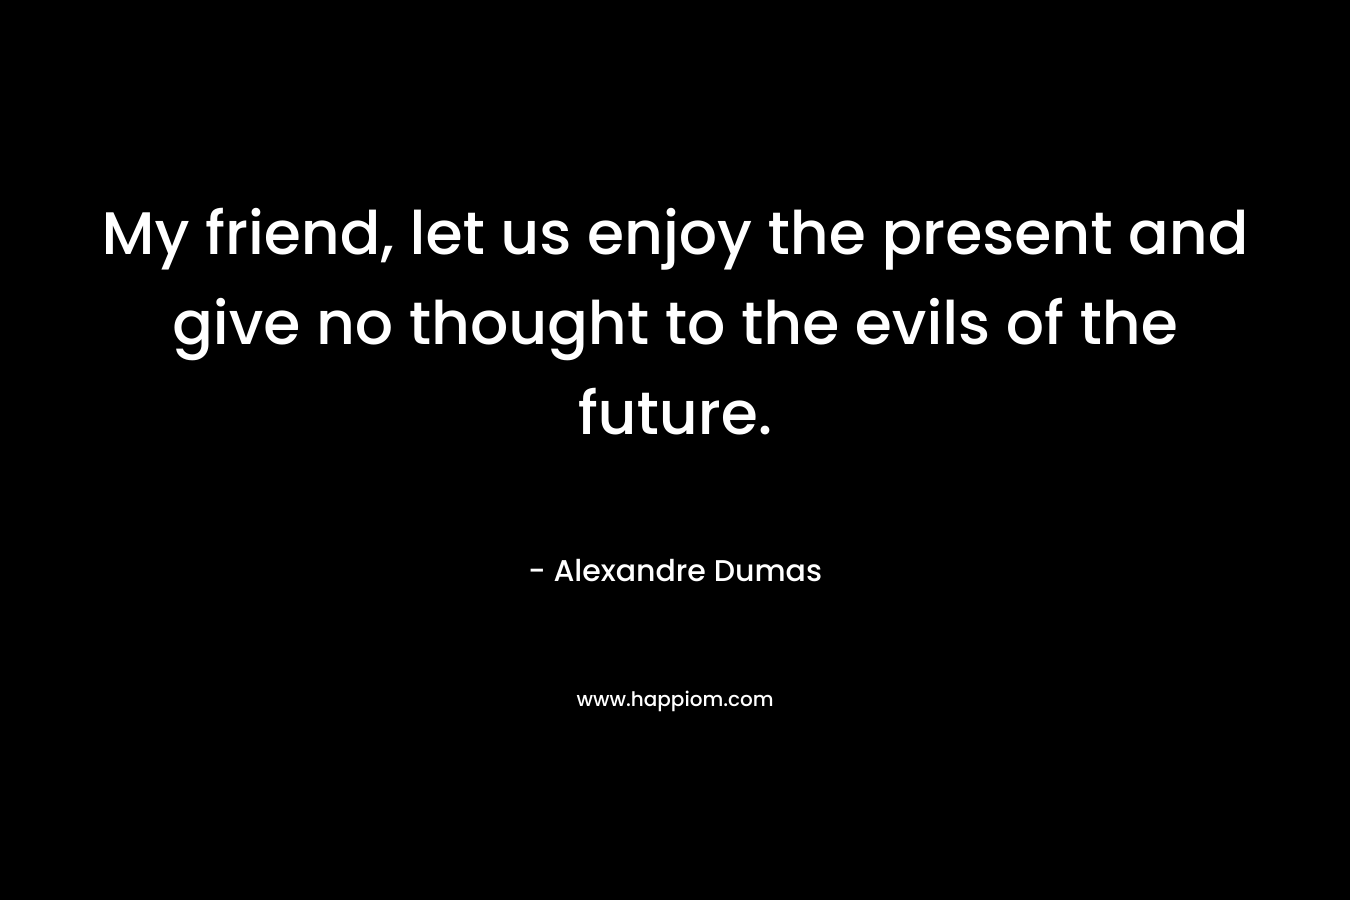 My friend, let us enjoy the present and give no thought to the evils of the future.